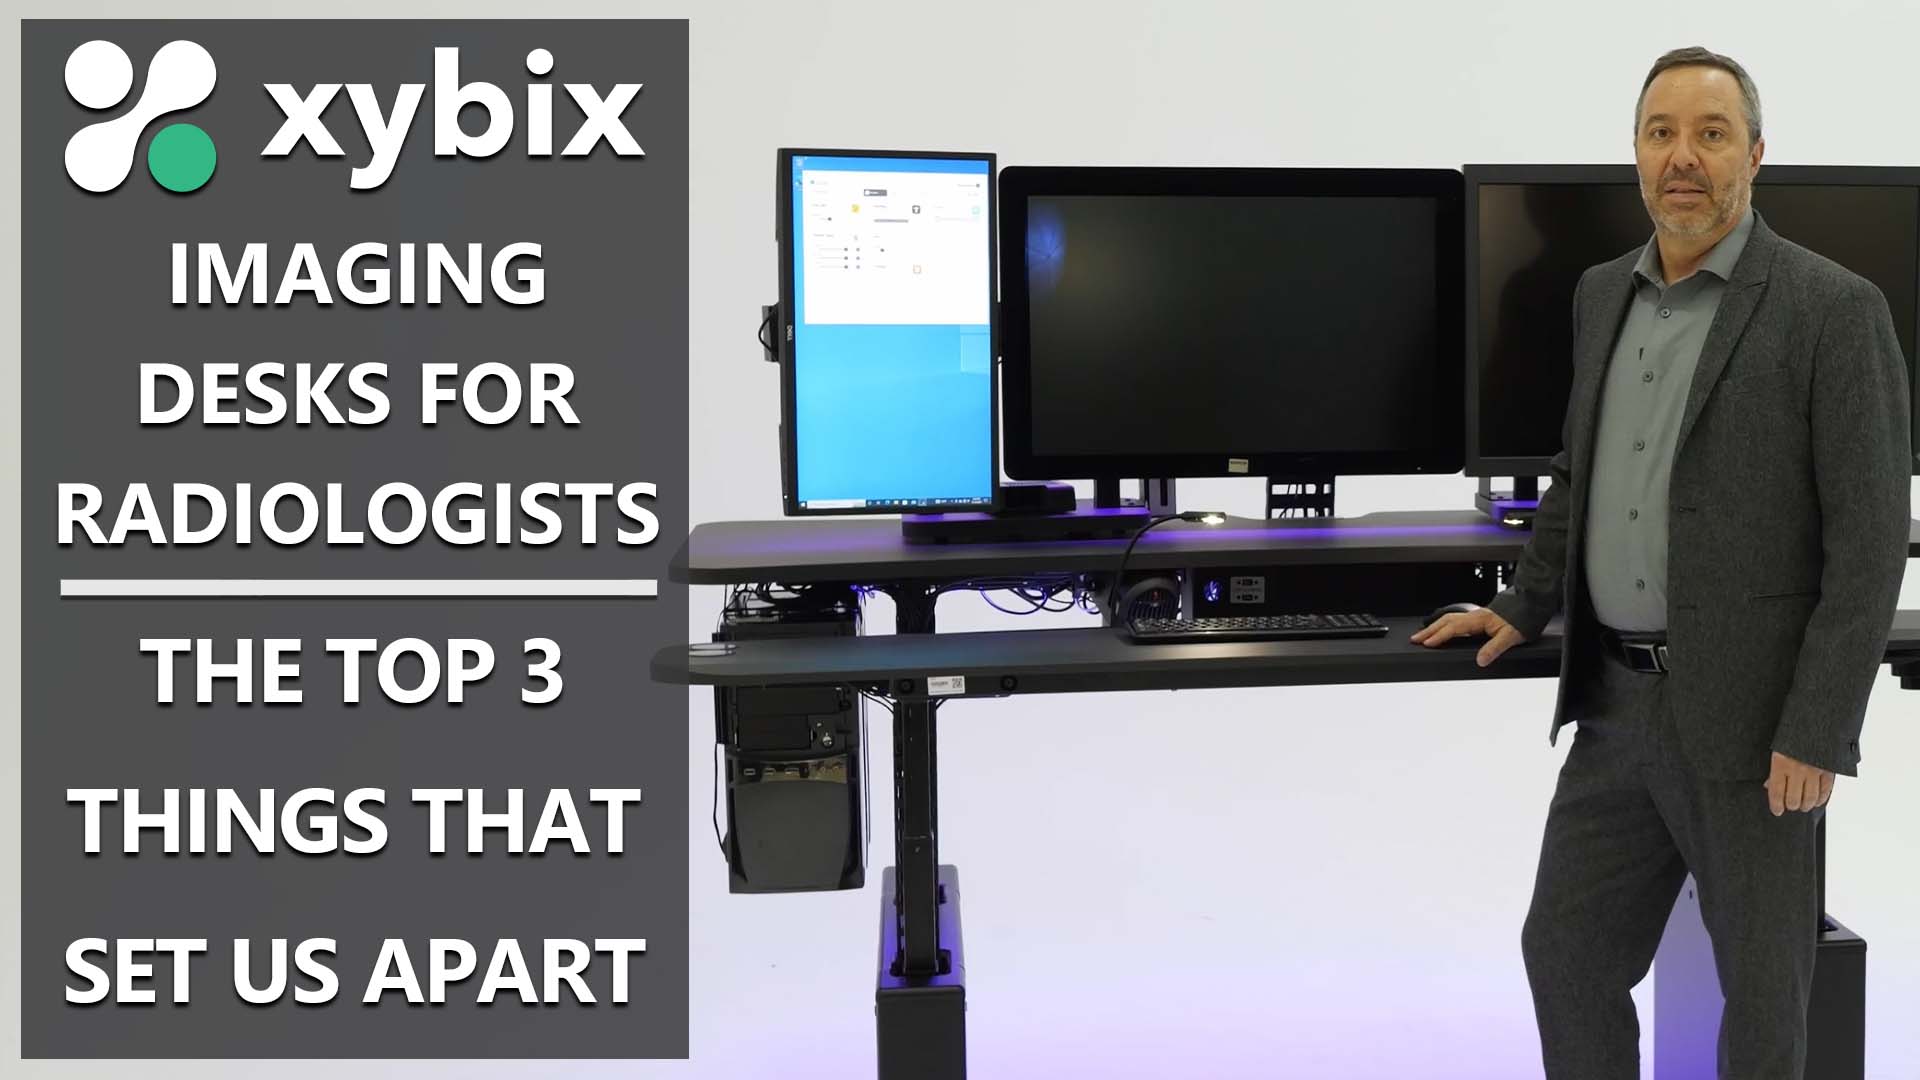 Imaging Desks for Radiologists: The Top 3 Things That Set Xybix Apart